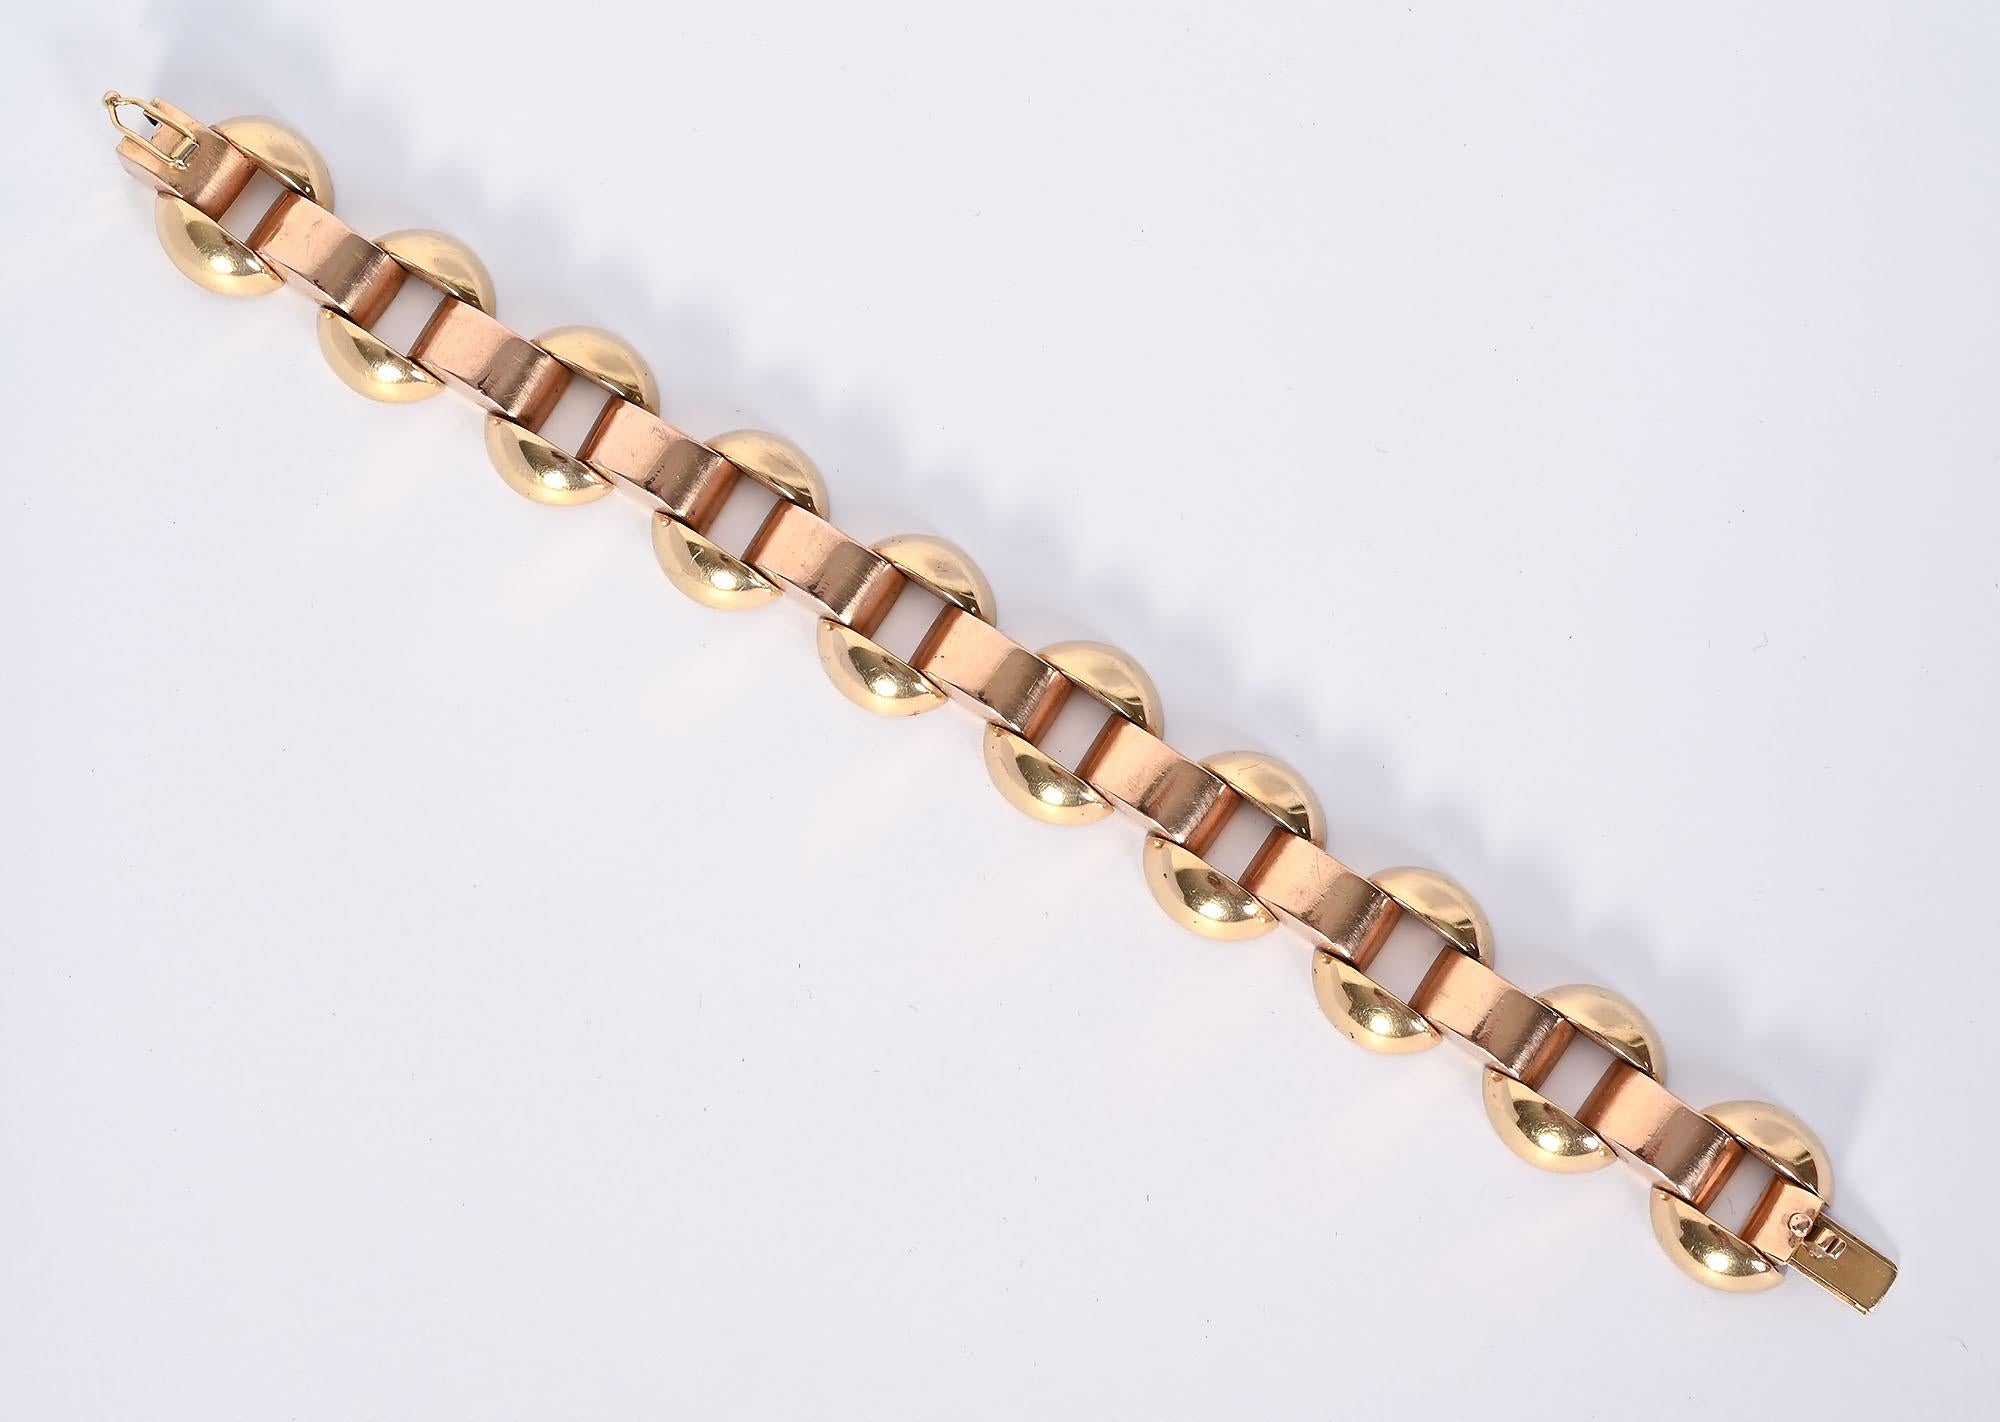 Classic Retro bracelet with both yellow and rose gold. Oval links of yellow gold are surmounted by pink gold arched links. The bracelet is 7 1/4 inches in wearable length. It is 11/16 inch in width. The bracelet stands well on its own or can be